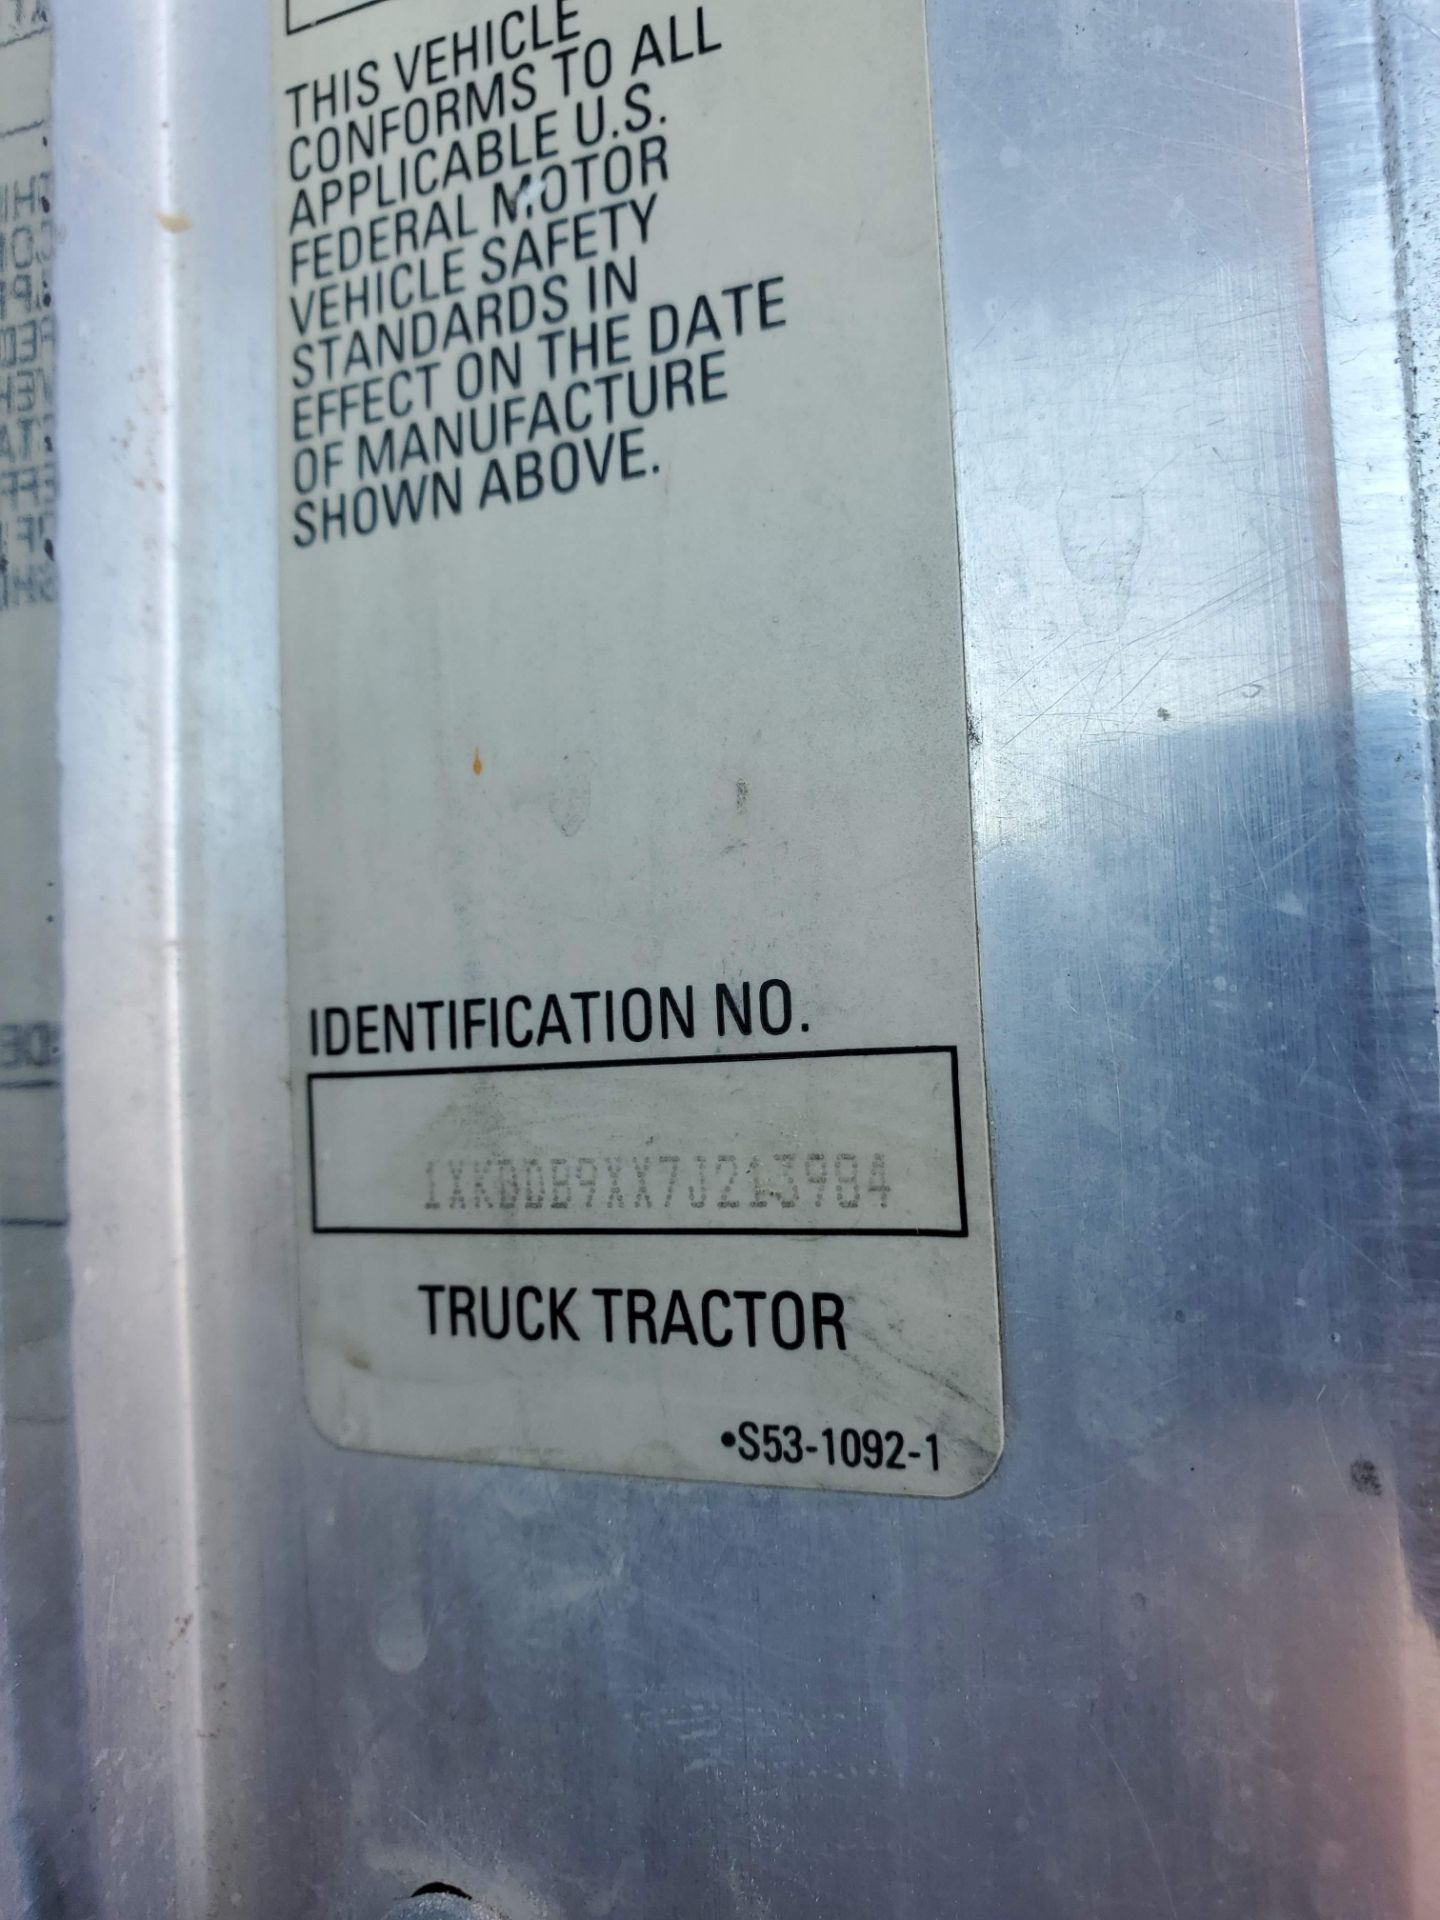 2007 Kenworth Tractor Truck (Located in LaBarge, WY) - Image 2 of 2